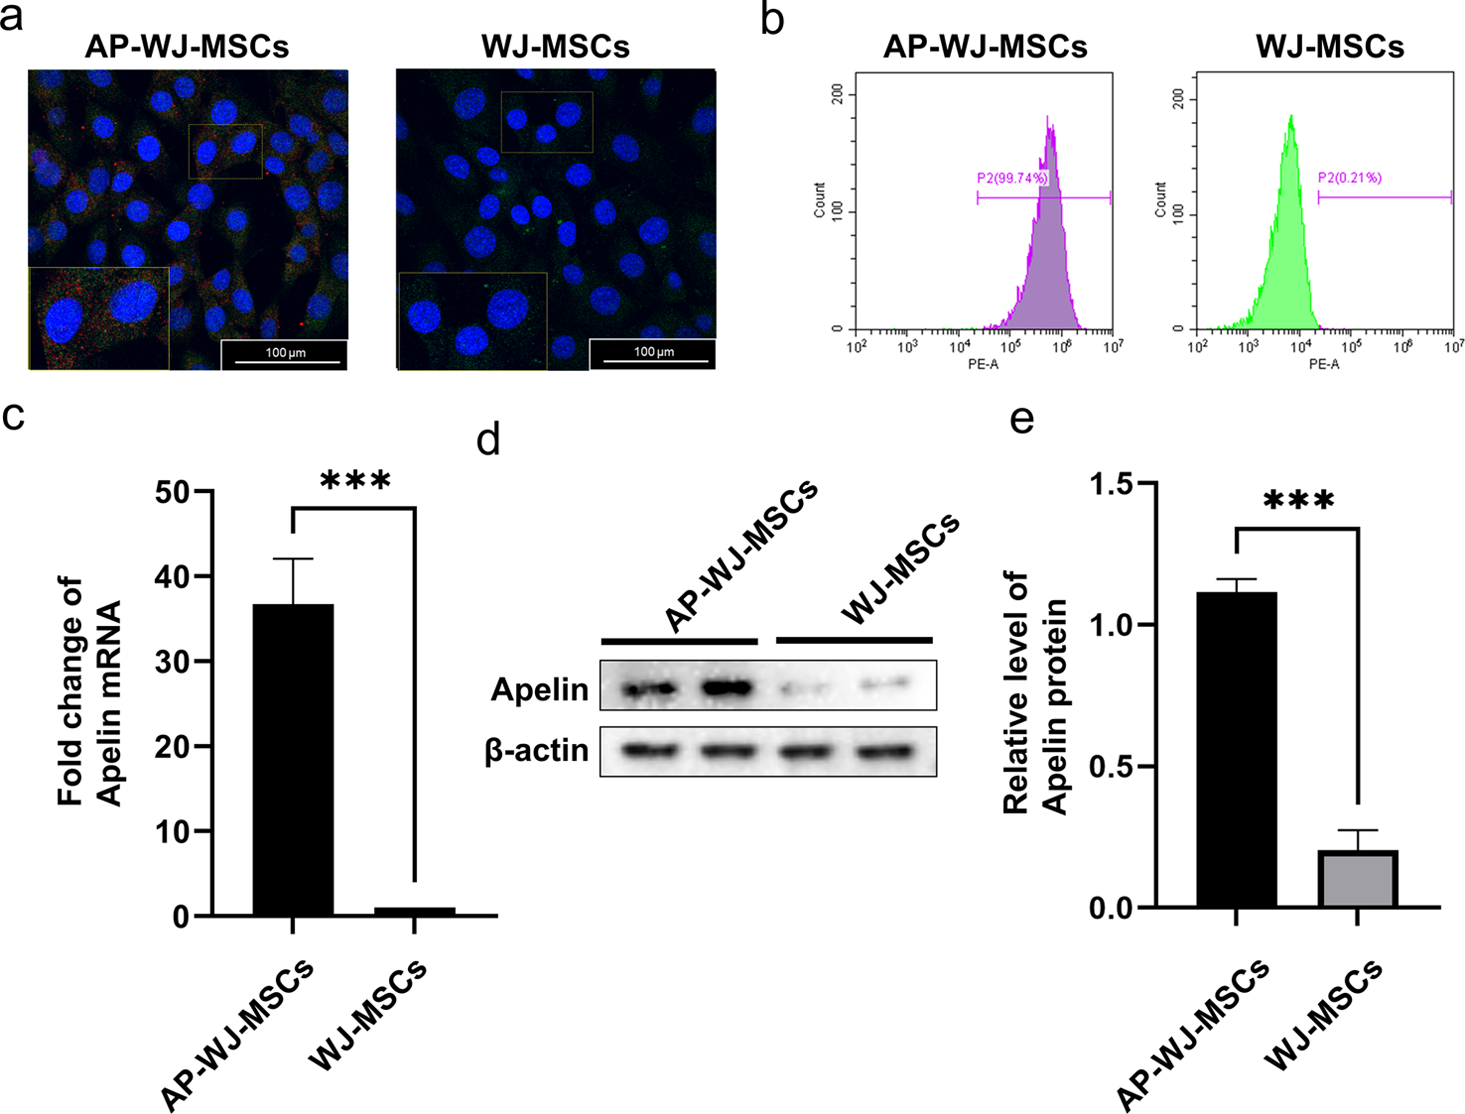 Enhancing insulin sensitivity in type 2 diabetes mellitus using apelin-loaded small extracellular vesicles from Wharton’s jelly-derived mesenchymal stem cells: a novel therapeutic approach